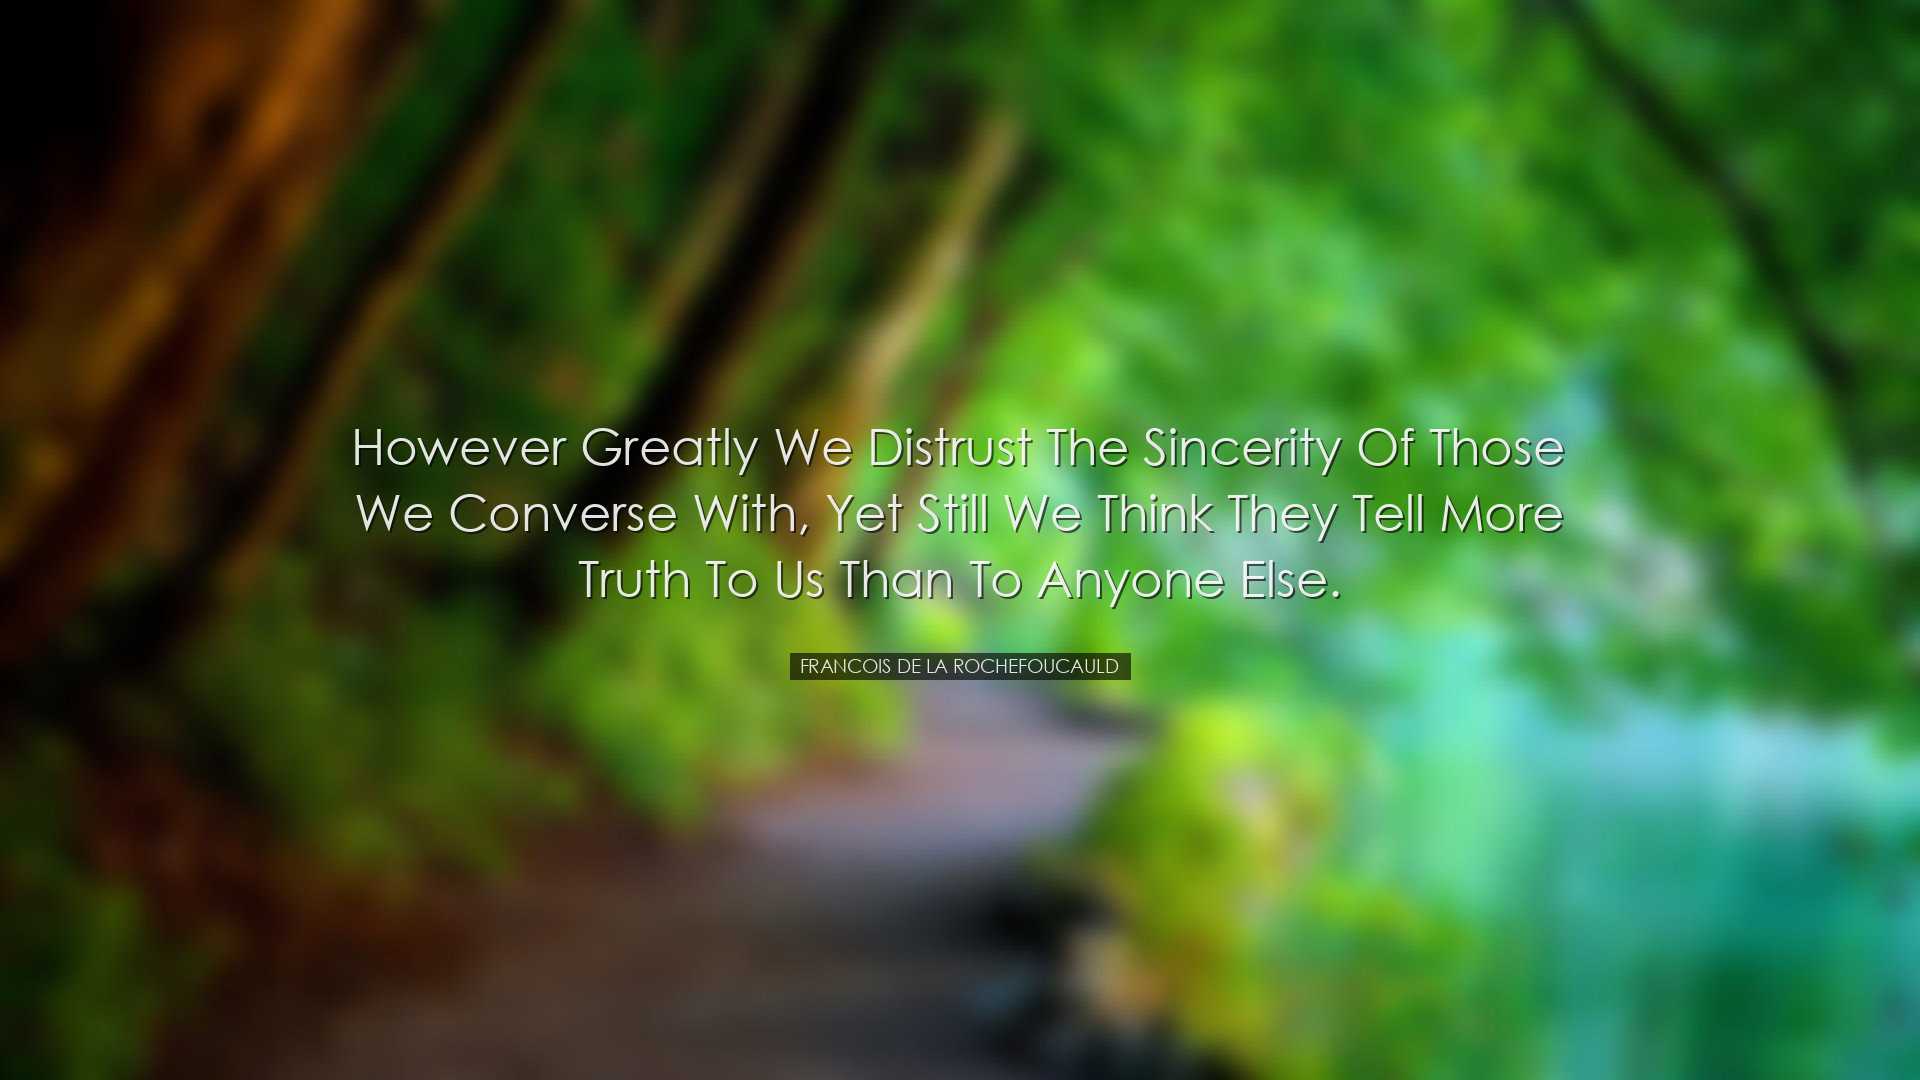 However greatly we distrust the sincerity of those we converse wit